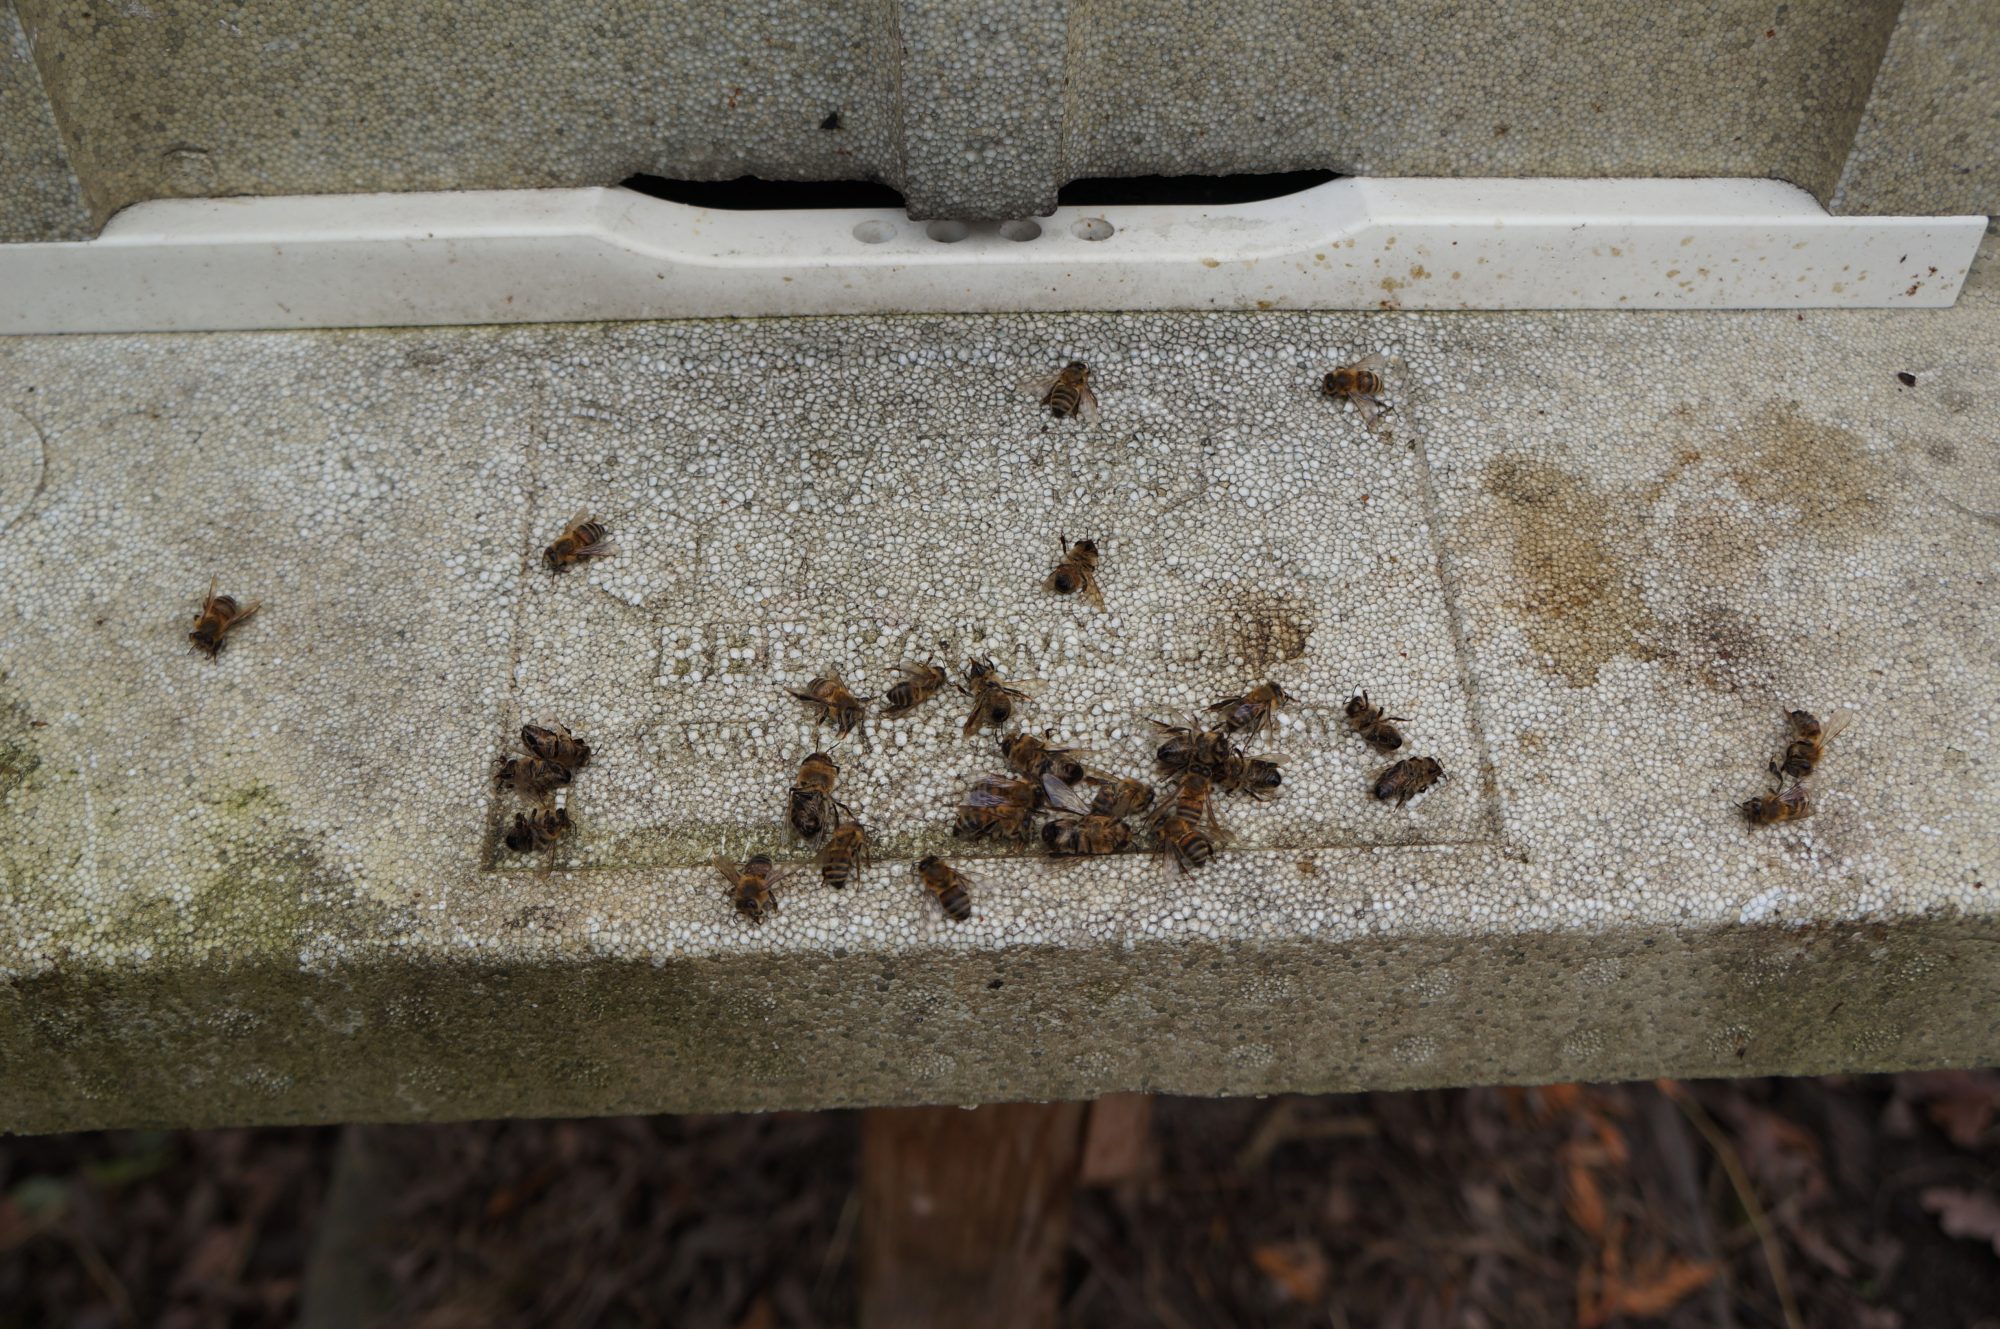 December '17 Dead bees outside of the hive entrance.